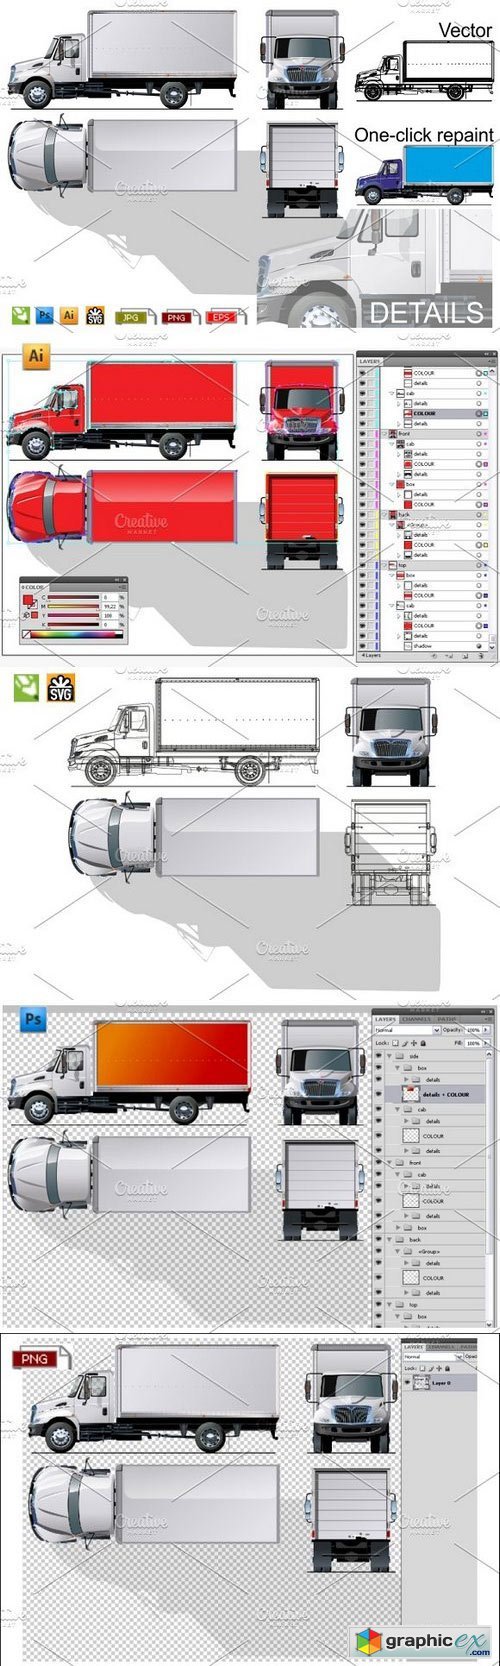 Delivery/cargo truck mockup